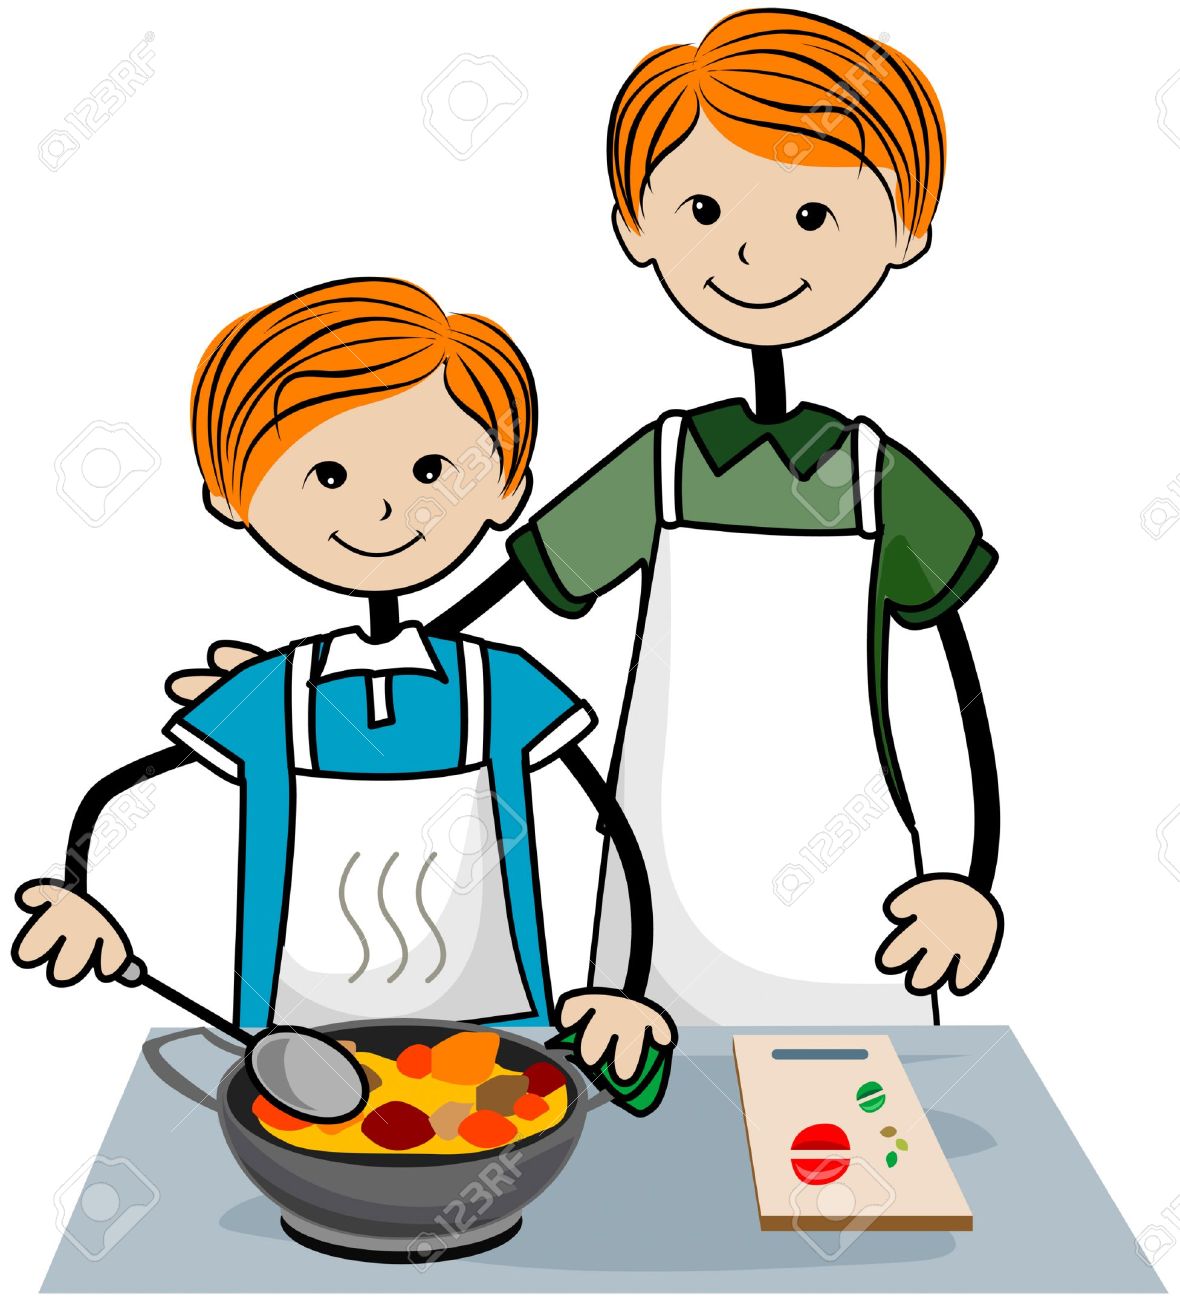 cooking clipart free - photo #20